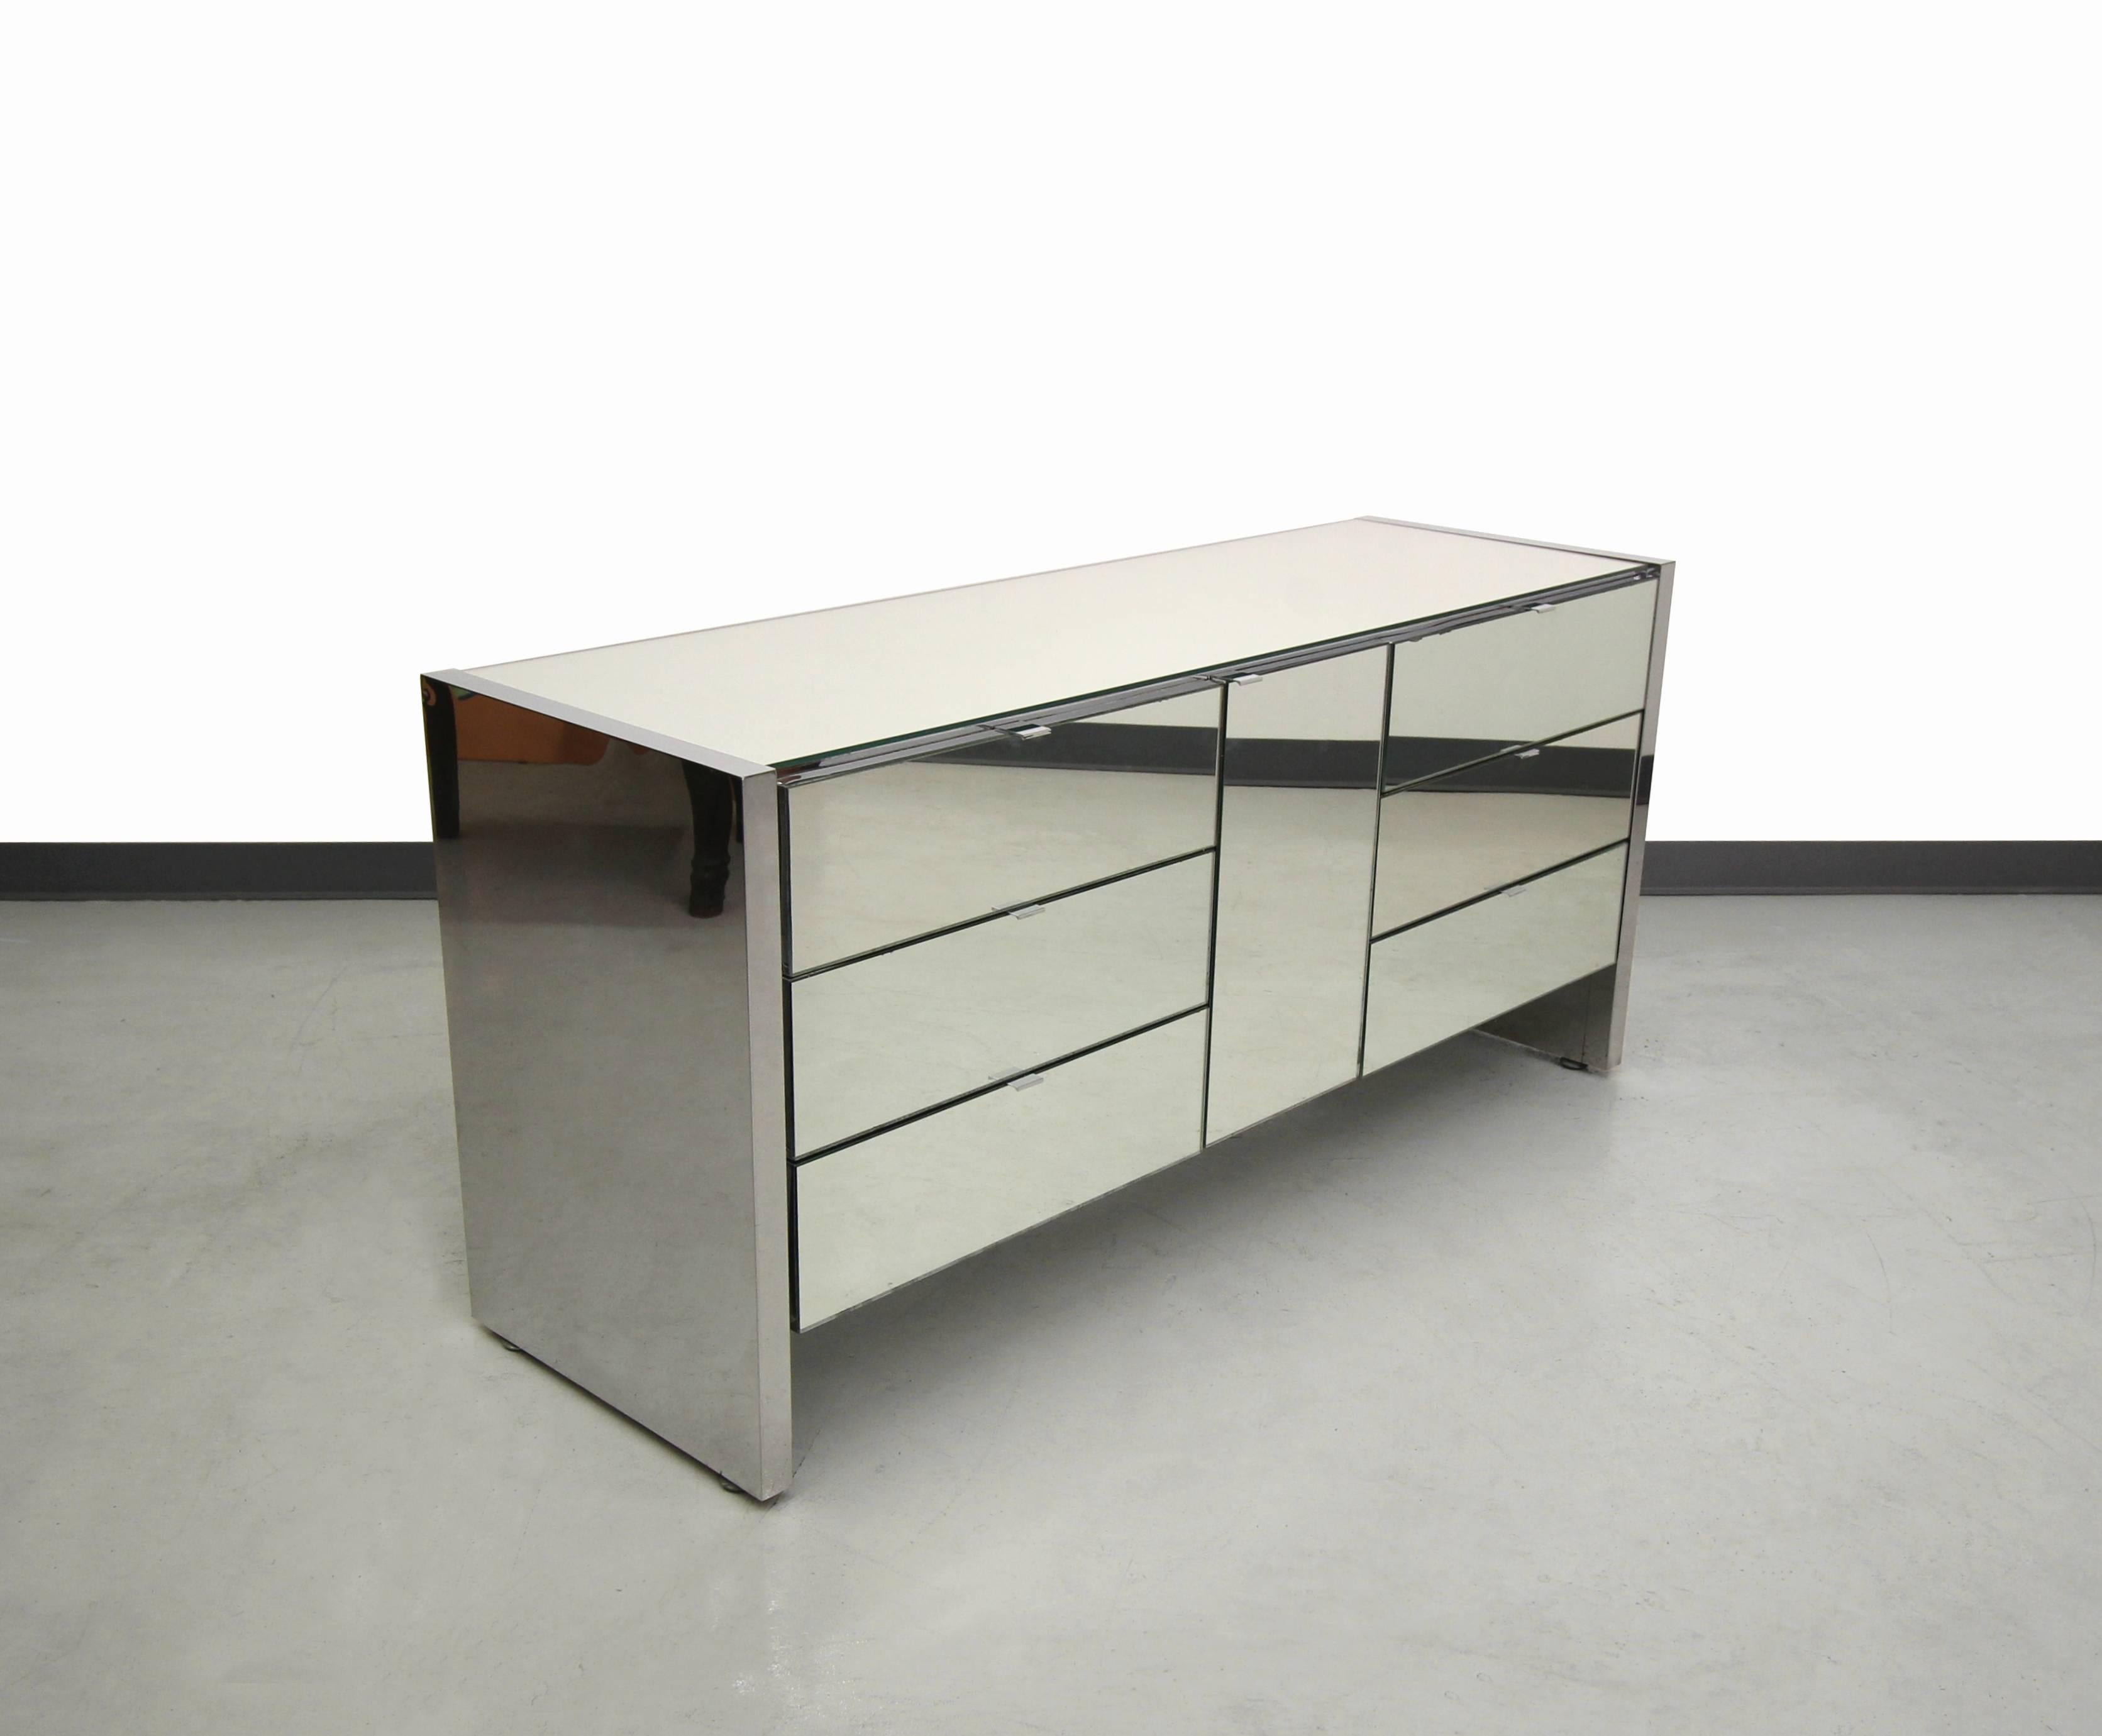 Gorgeous 1970s mirrored dresser credenza by Ello Furniture. These stunning mirrored pieces make real statements. Timeless in design, they really can be used in any room.